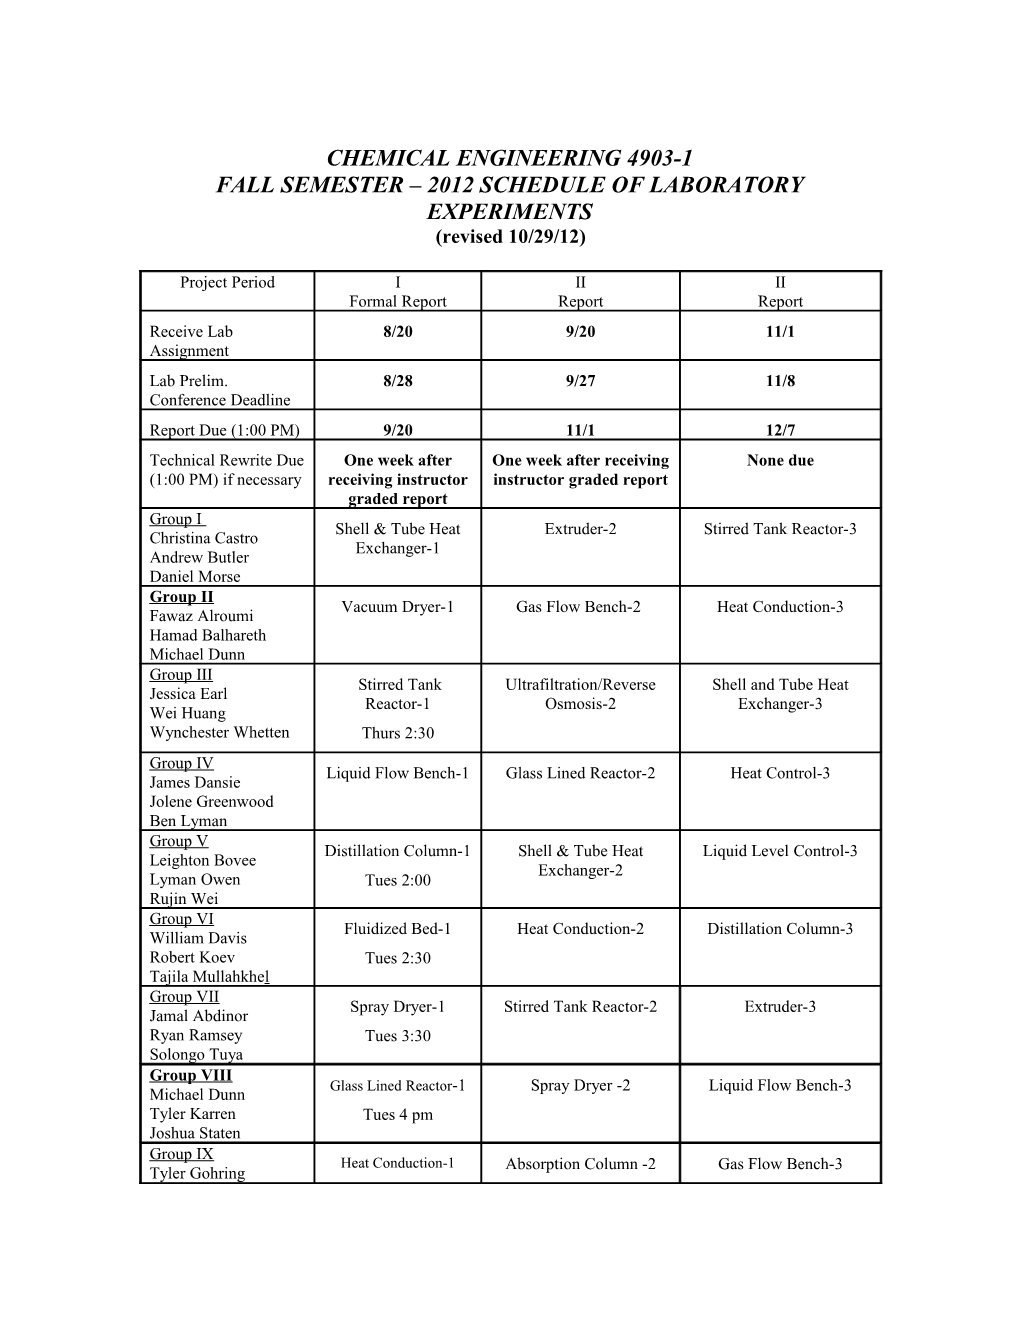 Chemical Engineering 4903-1 Fall Semester 2012Schedule of Laboratory Experiments